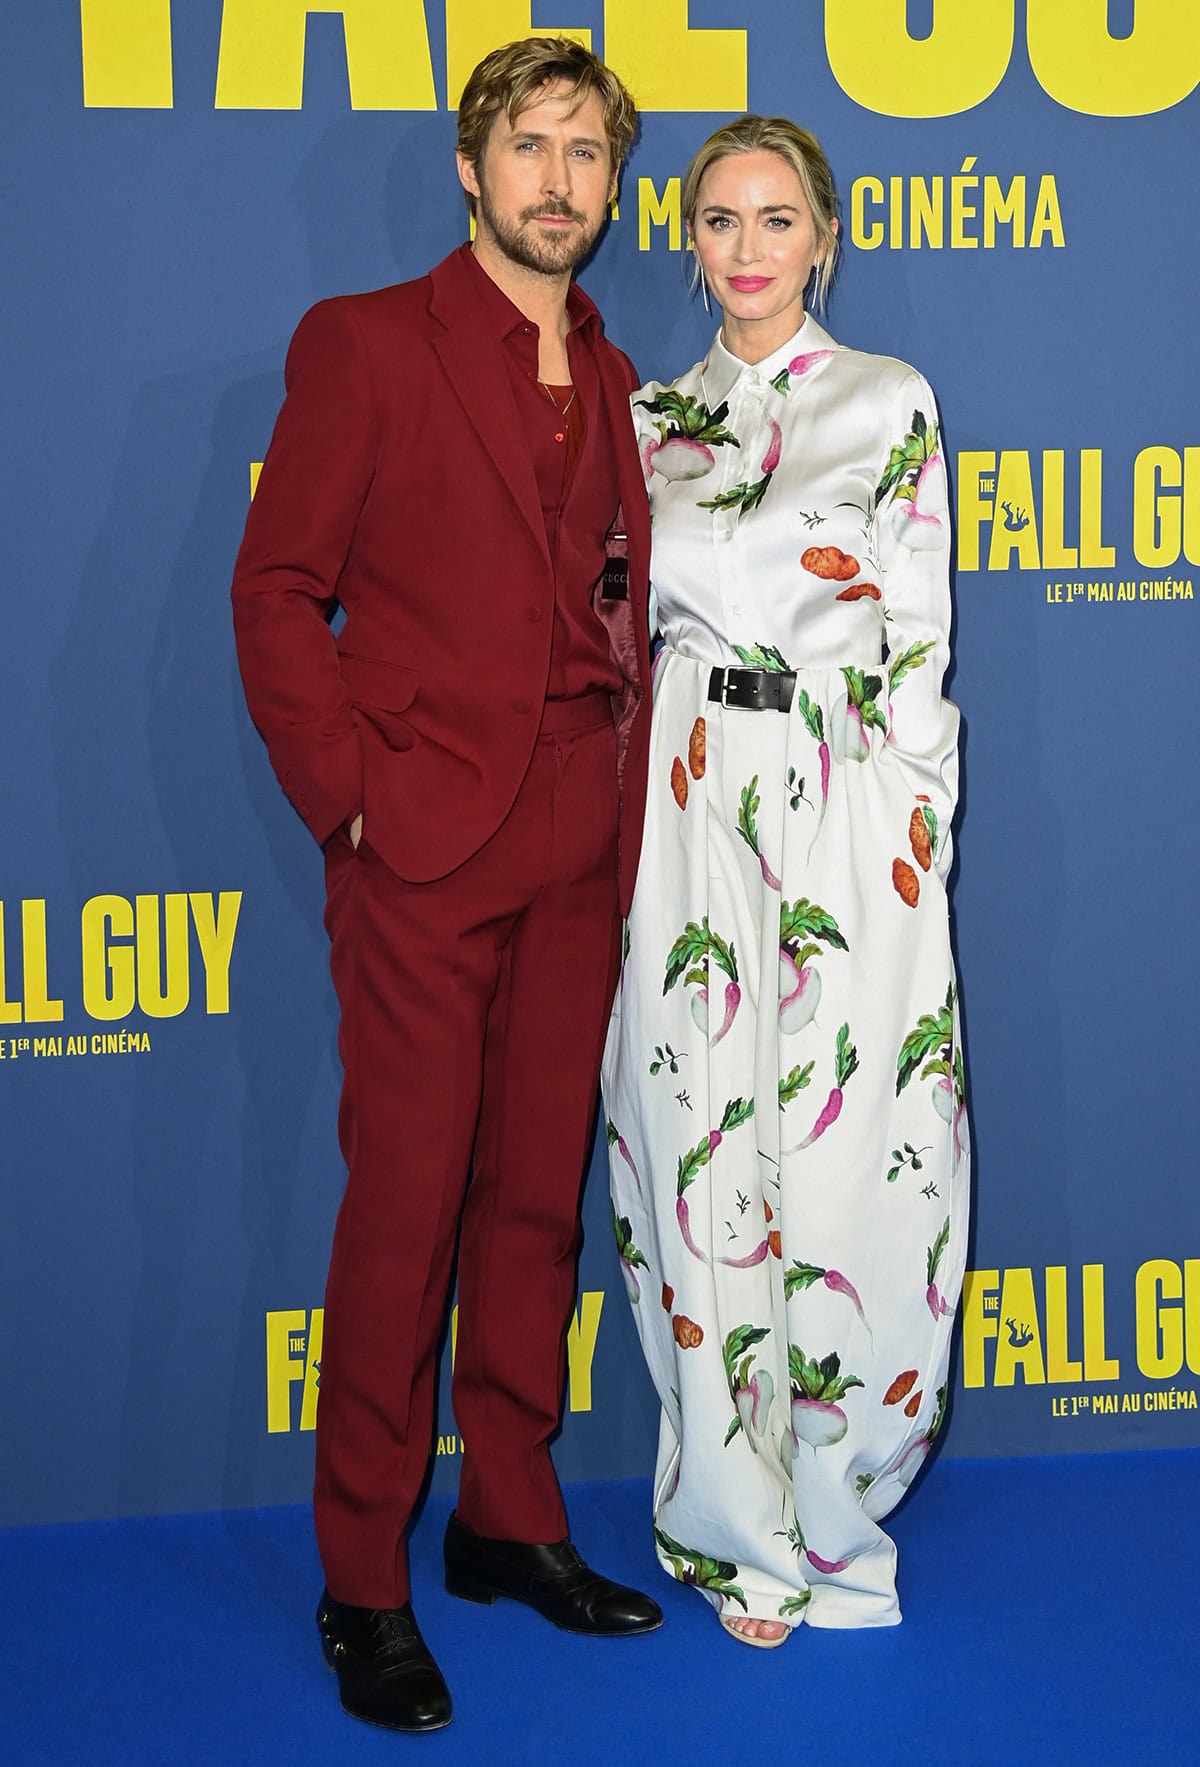 Ryan Gosling and Emily Blunt attend the Paris premiere of their upcoming movie, The Fall Guy, at the UGC Normandie cinema on April 23, 2024